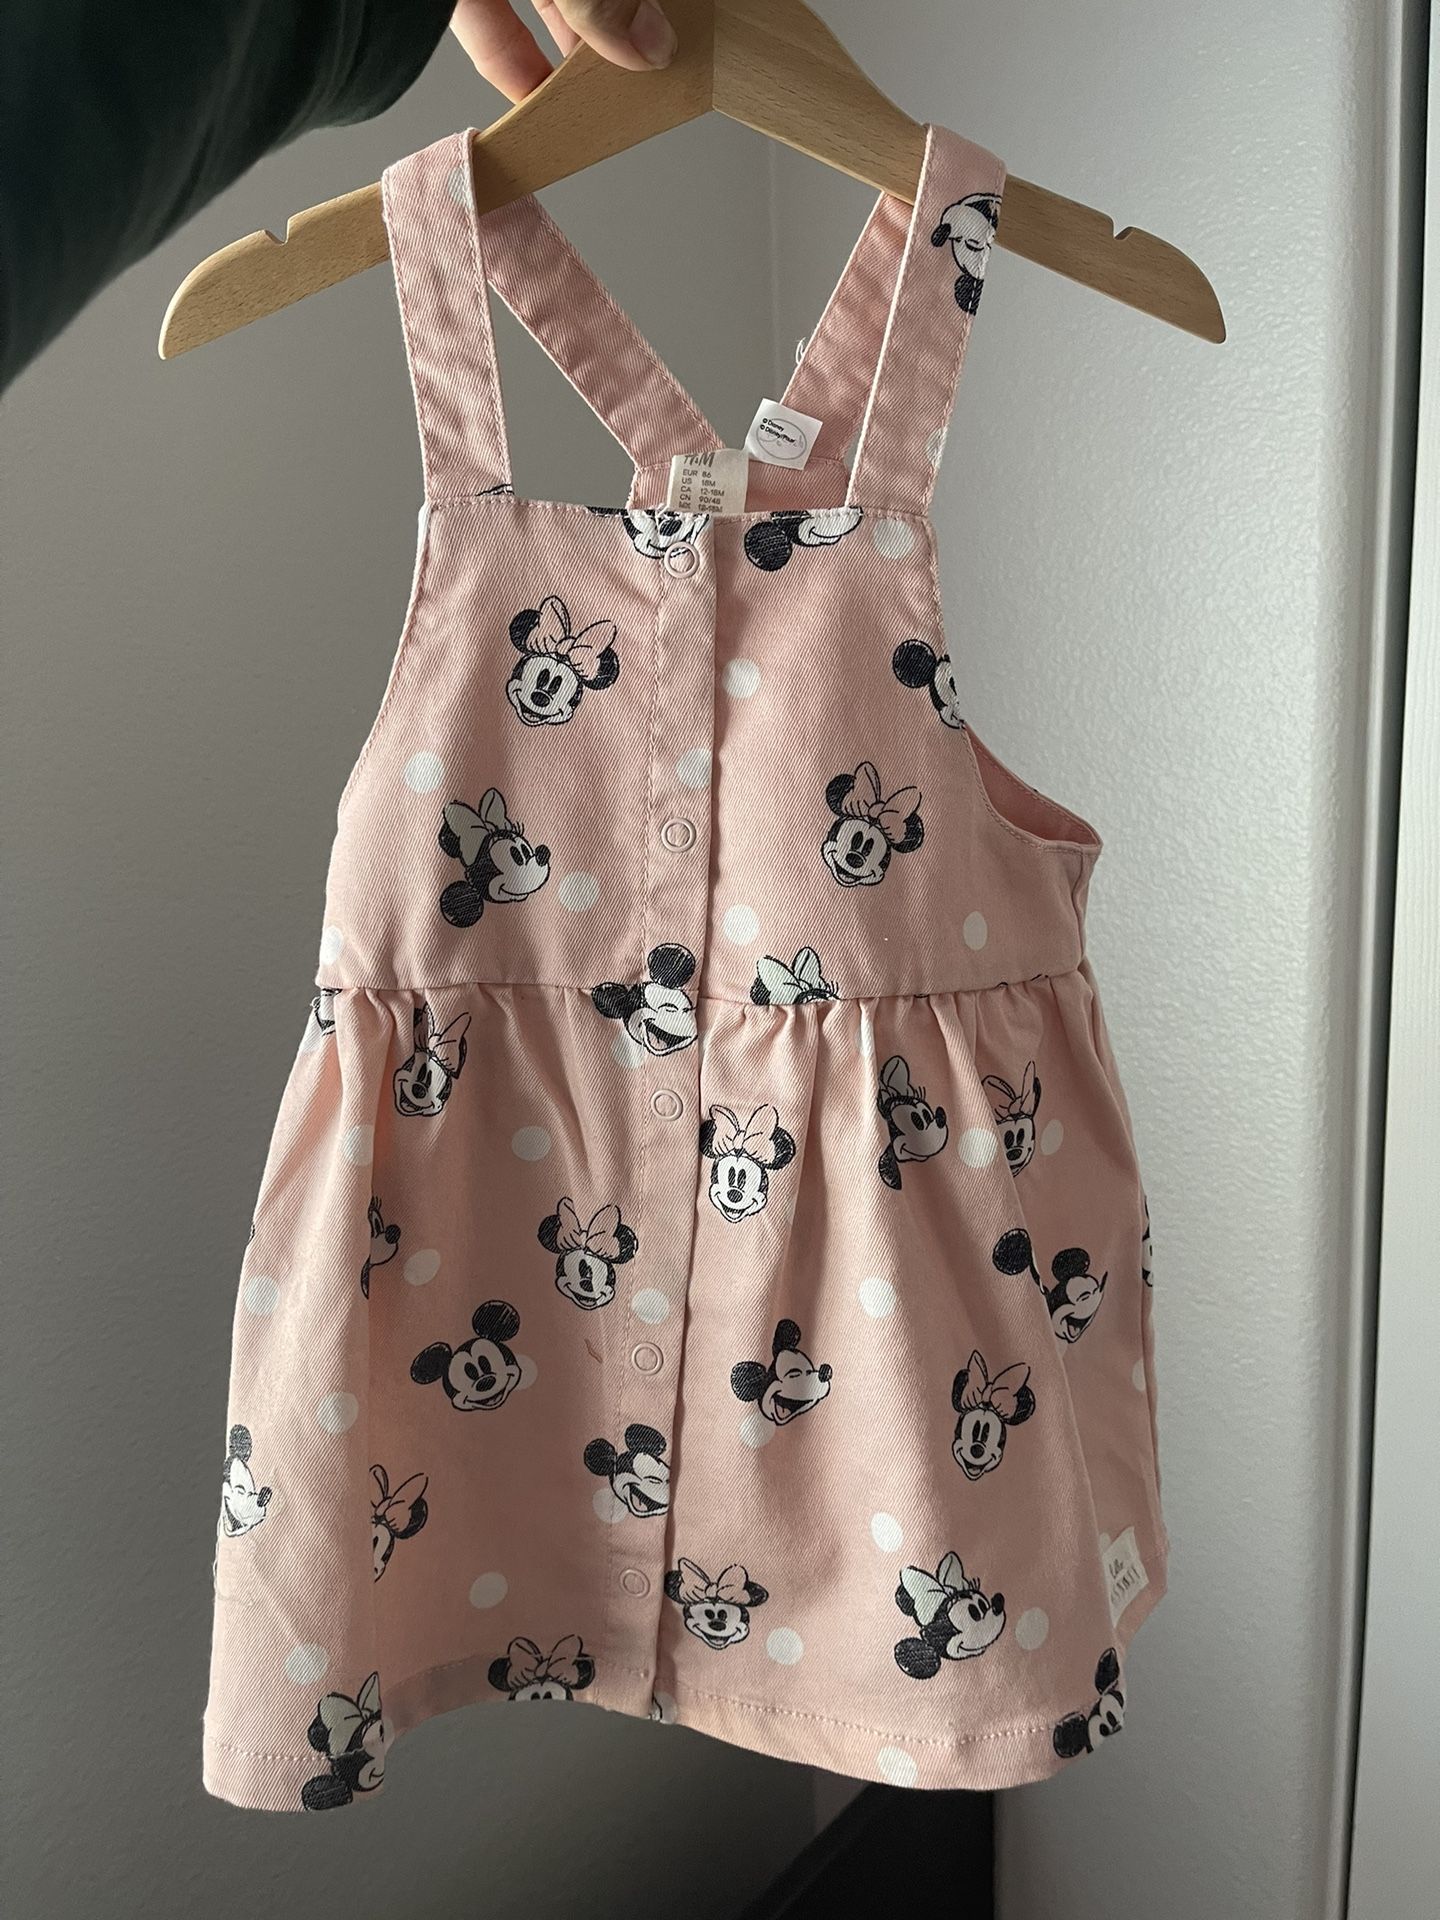 Mickey Mouse Overall Dress 18 Months 